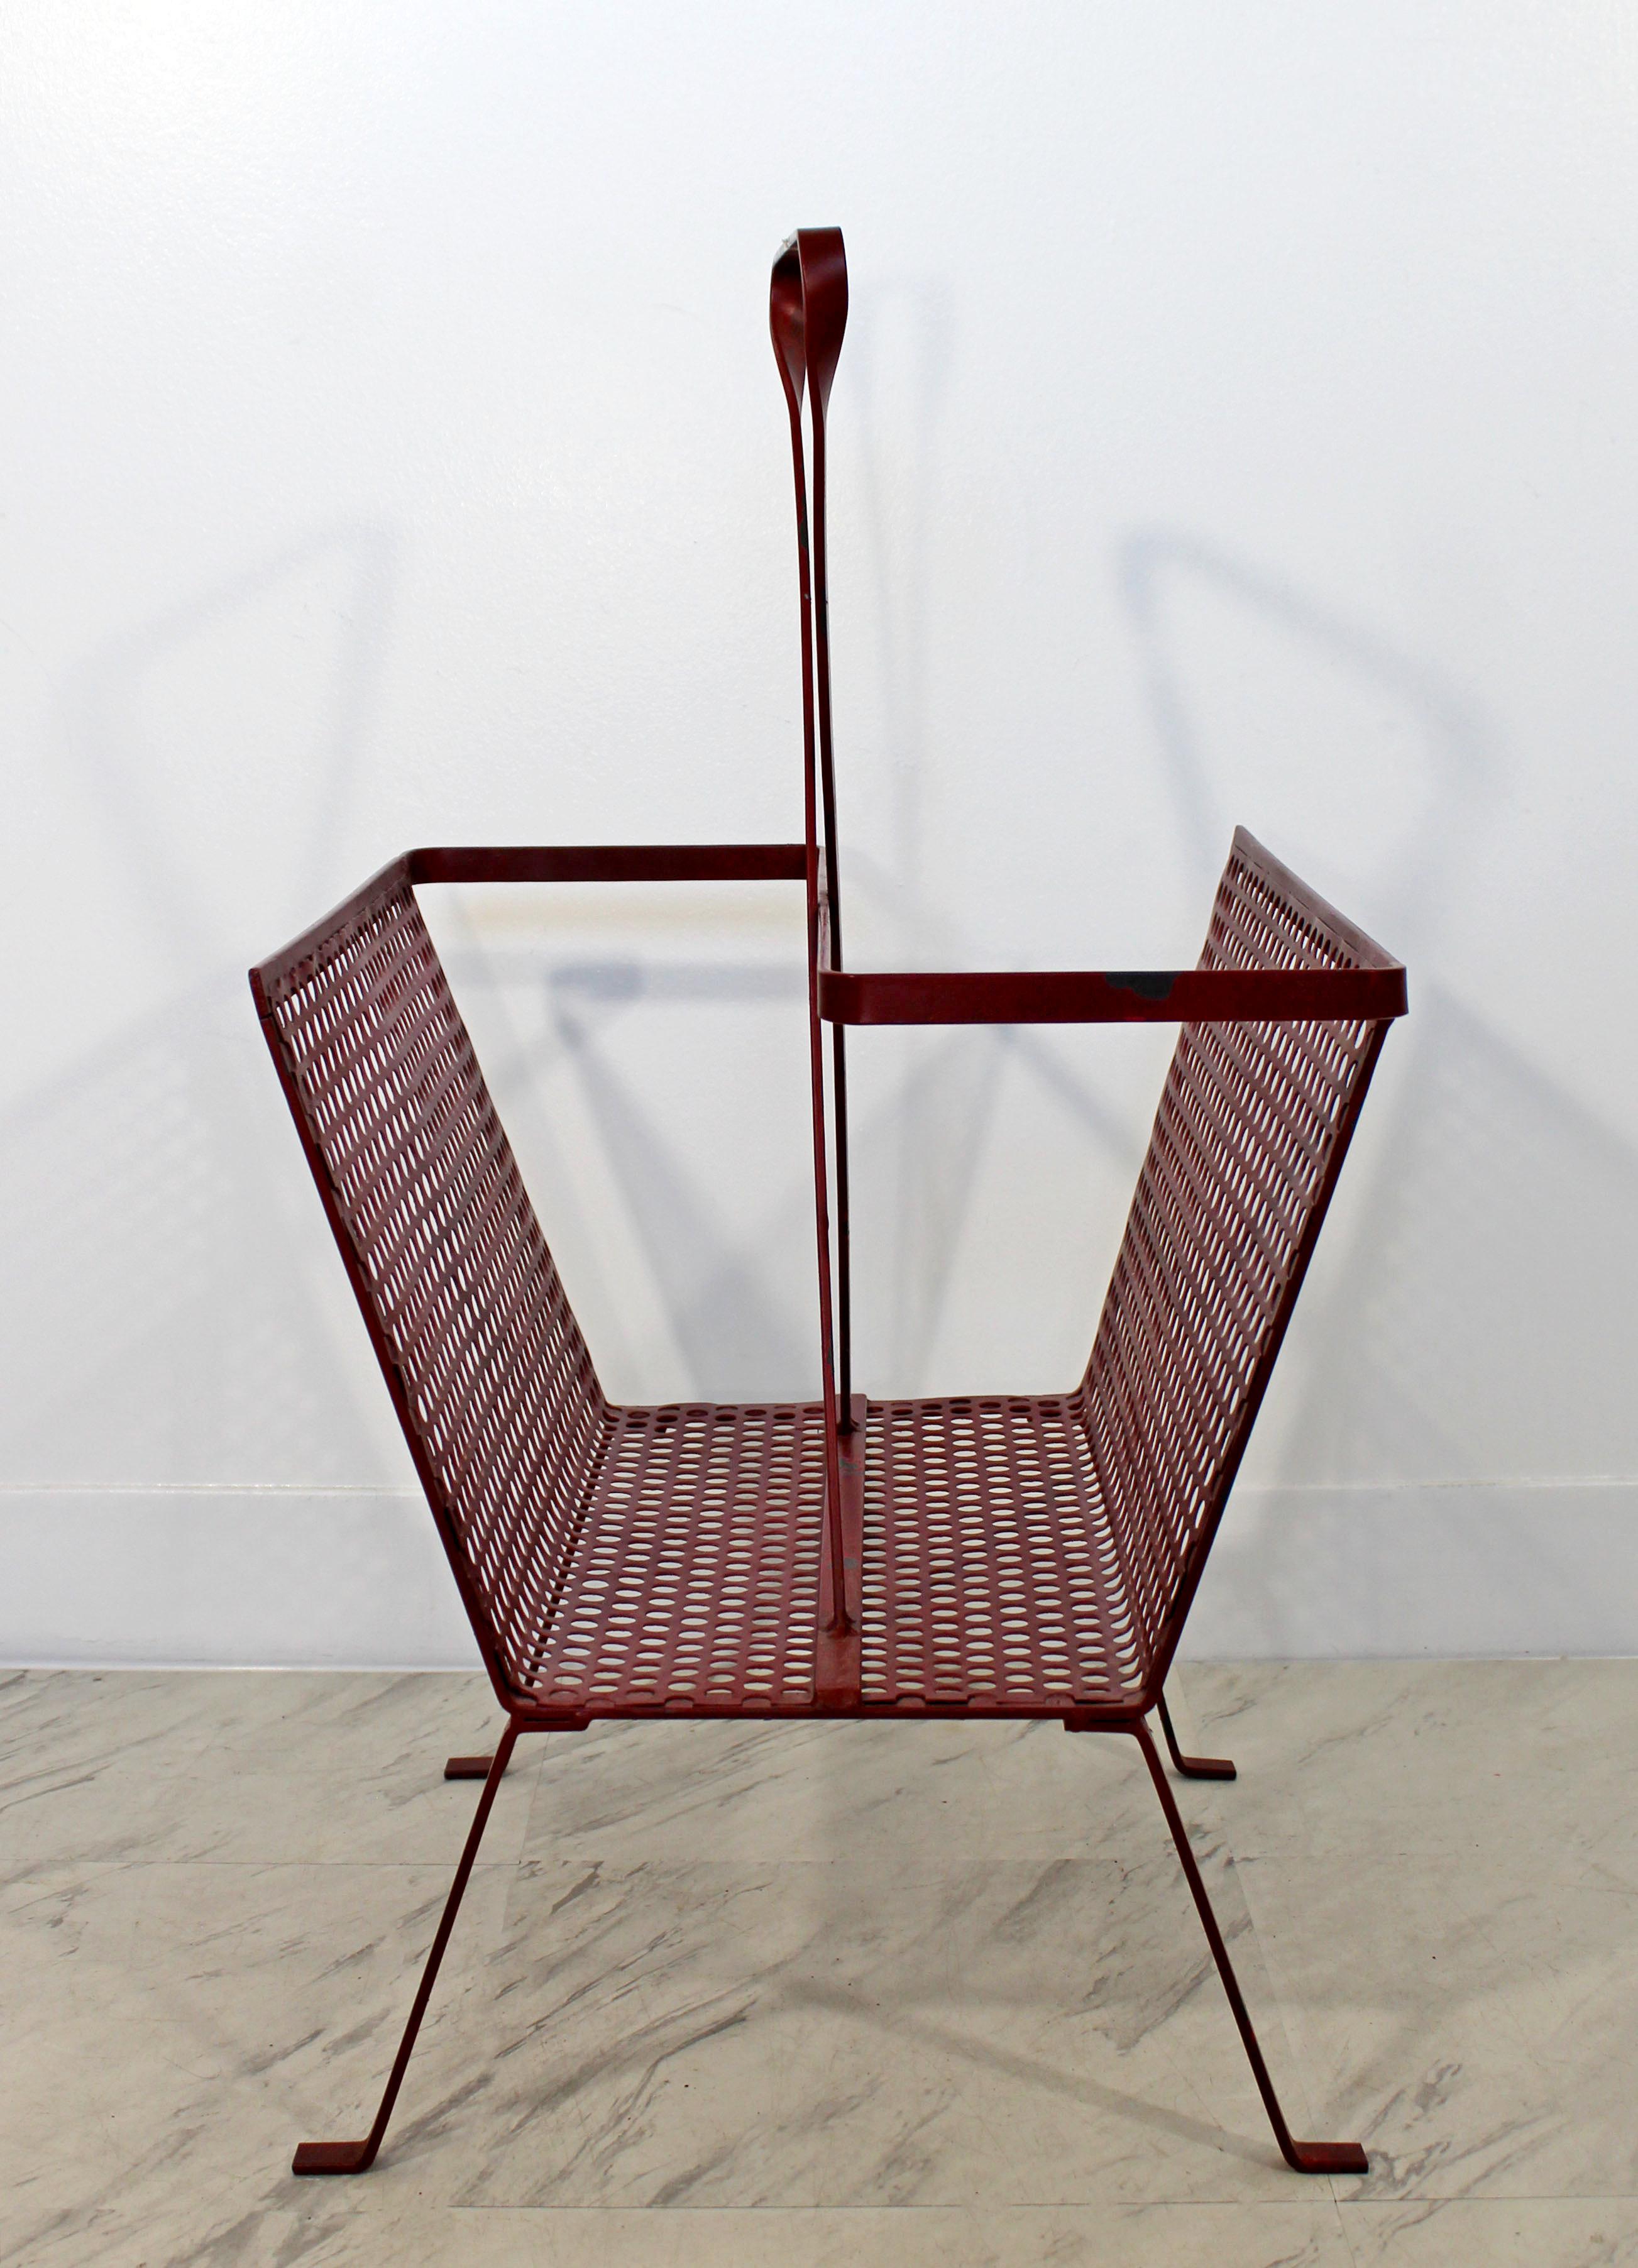 For your consideration is a small, red painted mesh metal magazine rack, in the style of Mathieu Mategot. In vintage condition. The dimensions are 15